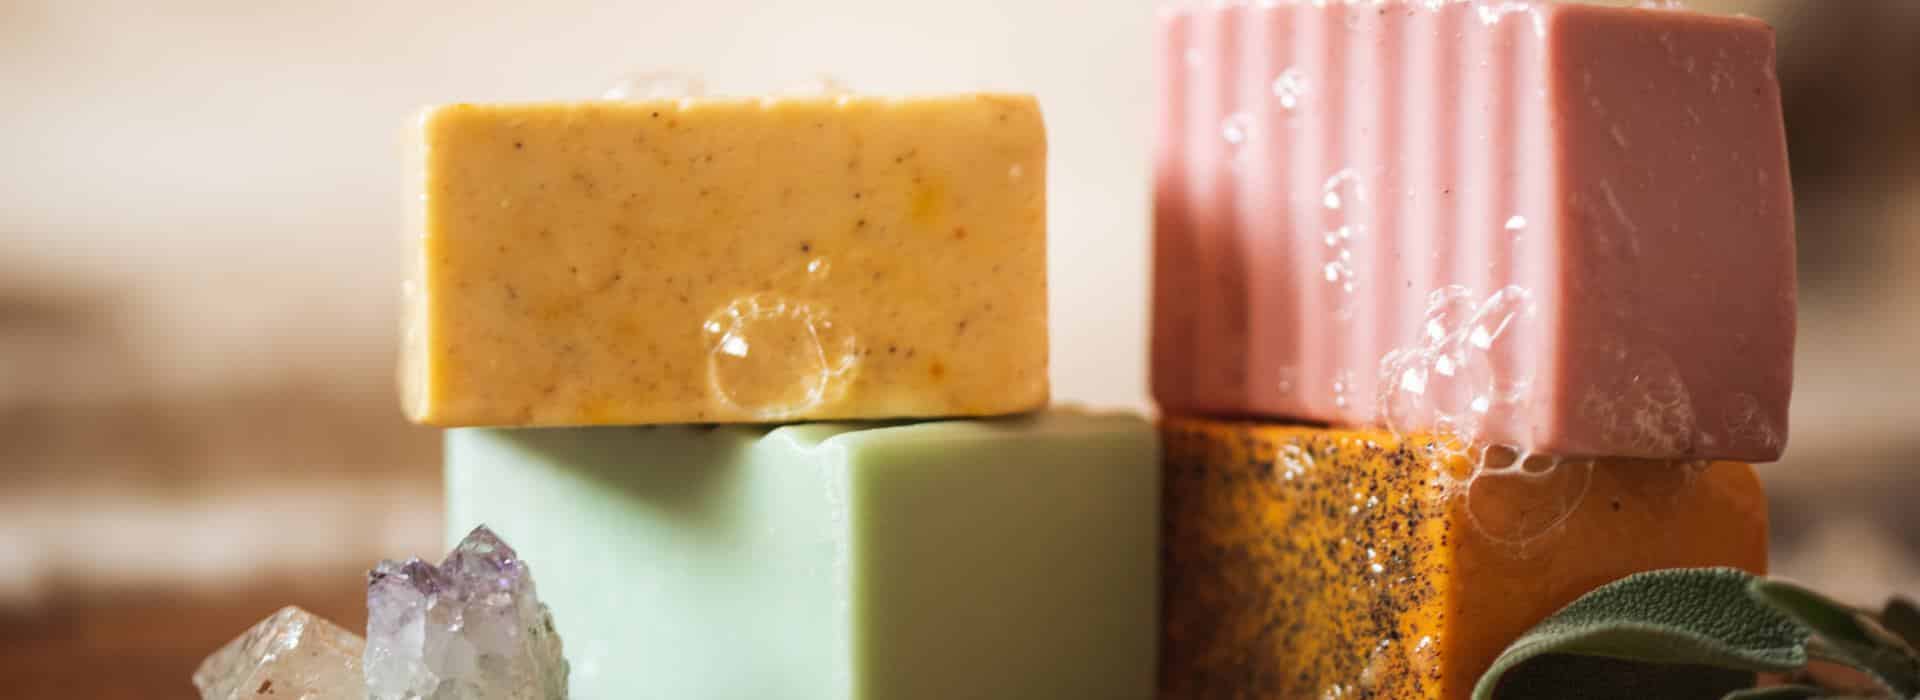 Group of Lower Chakra Soaps | Your Chakra System and the 5 Second Rule | Shine Body & Bath Chakra Soap | Blog